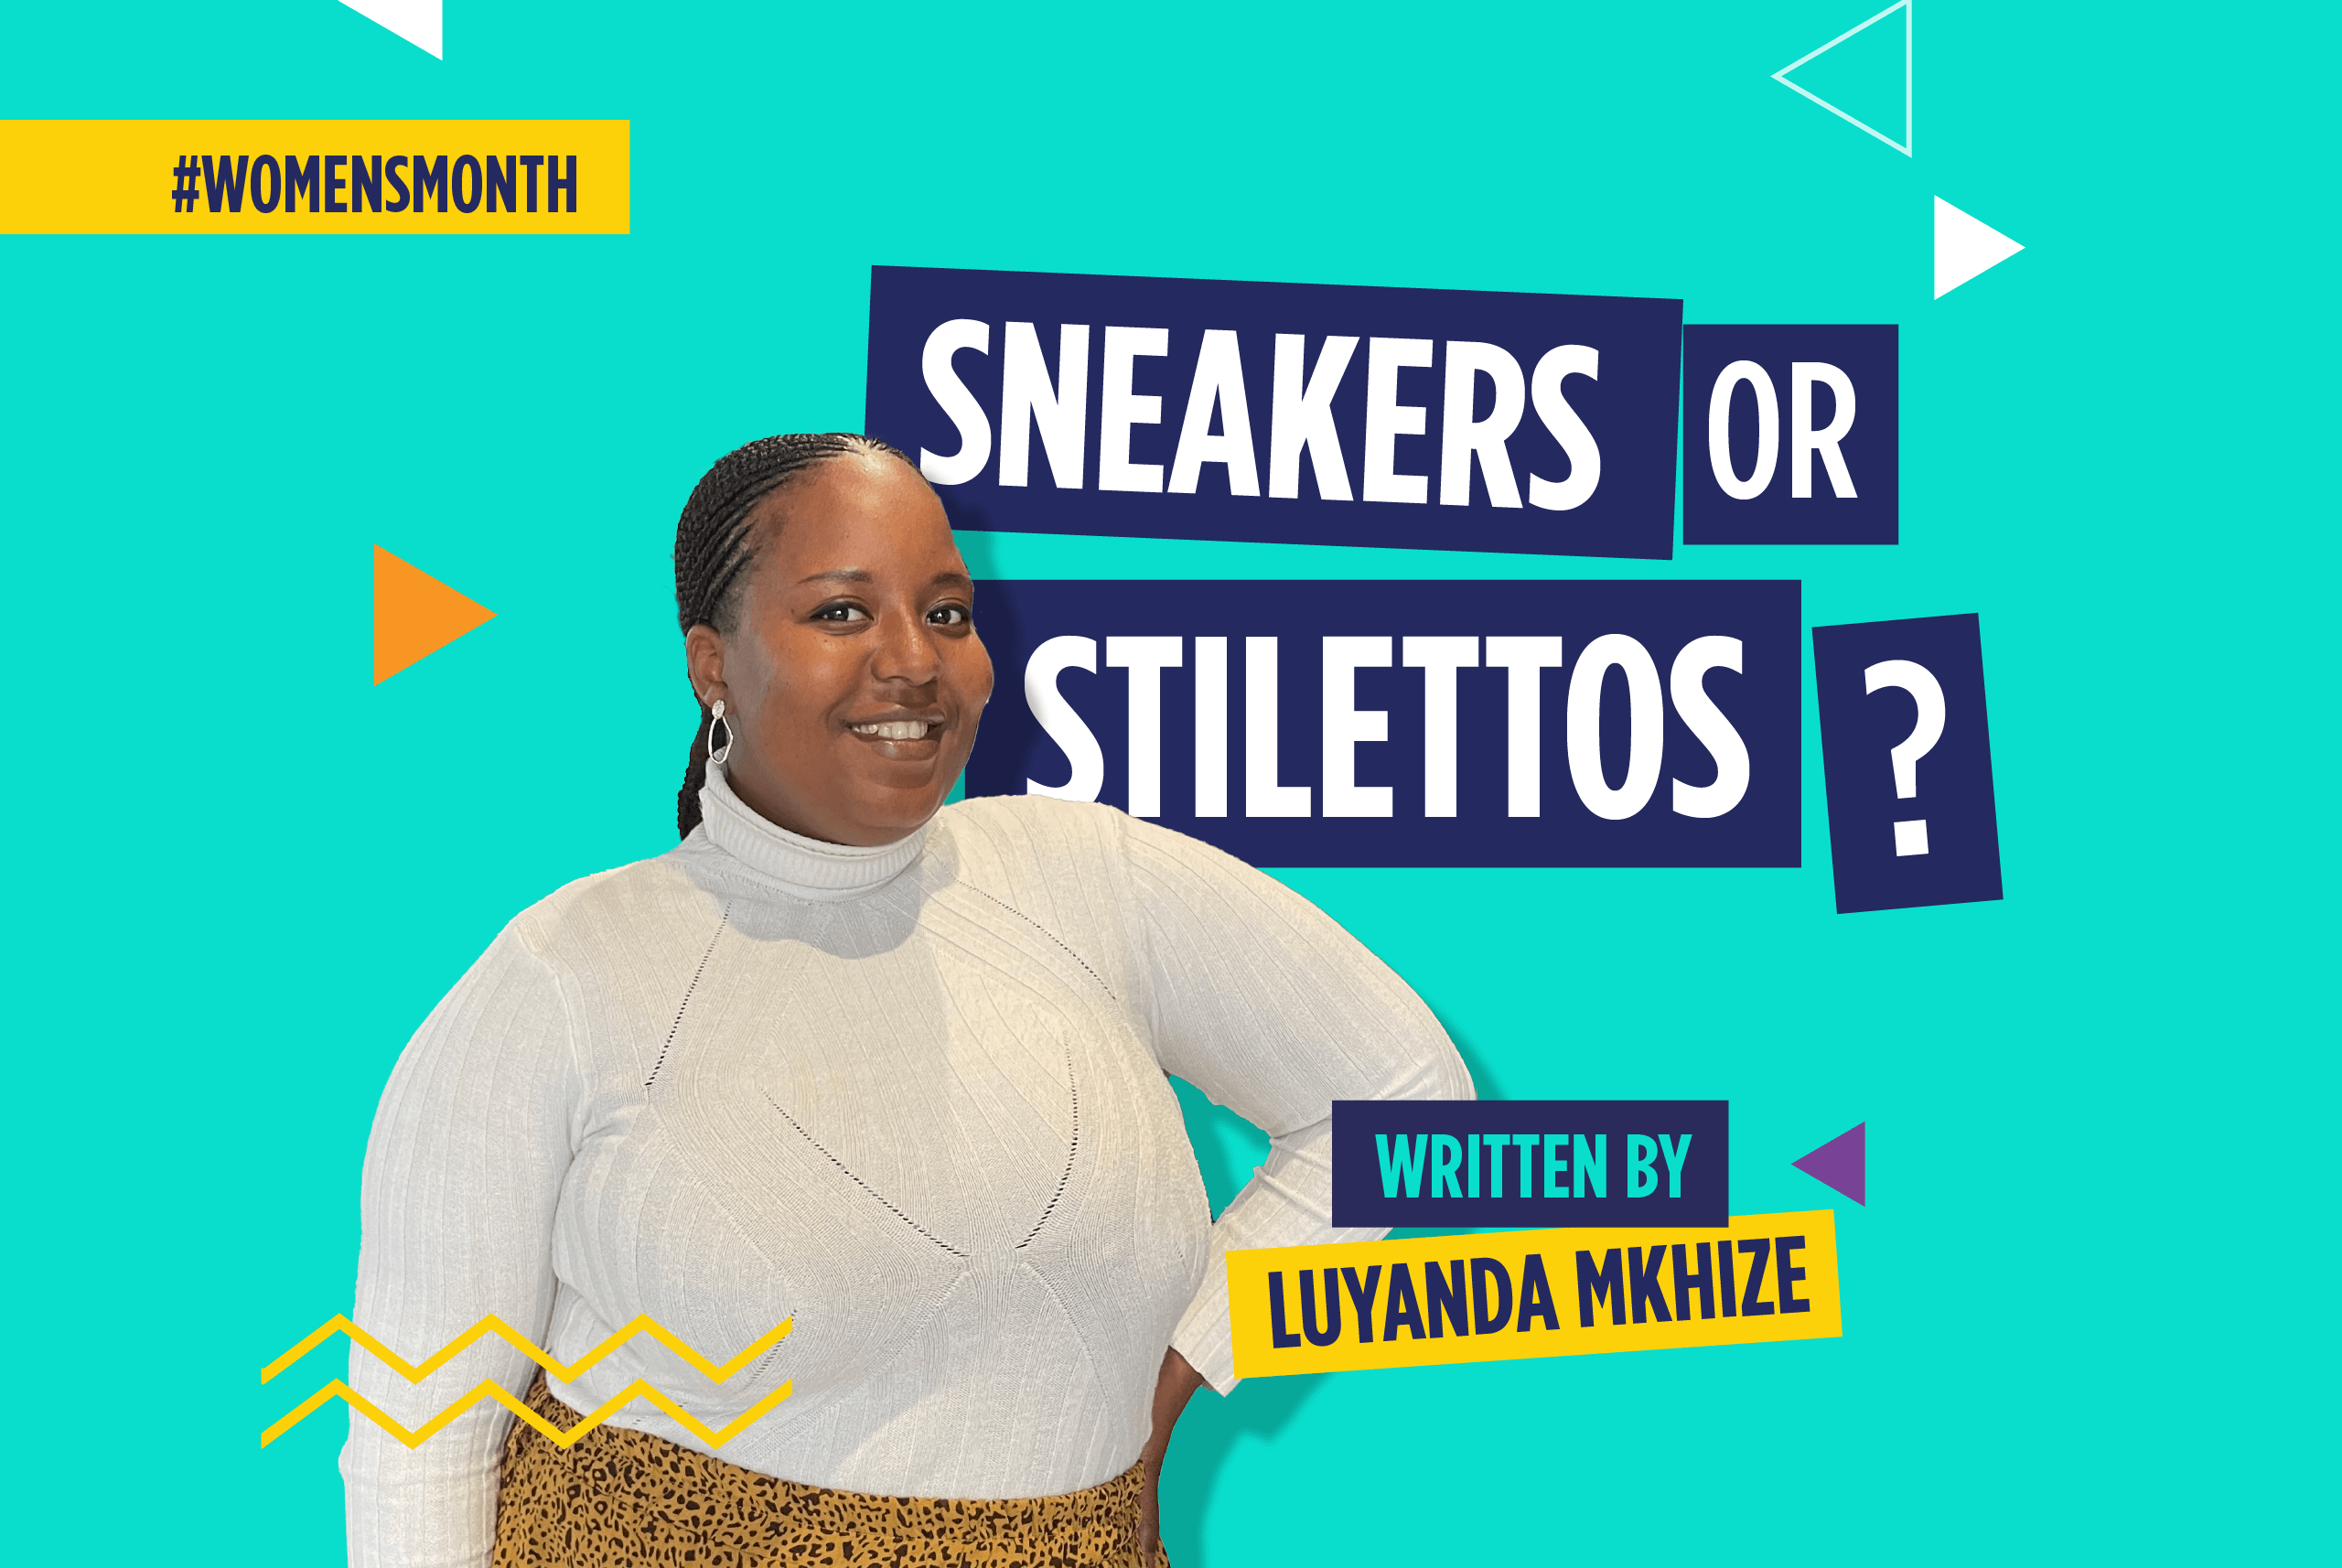 Luyanda Mkhize - Product Specialist talking about Sneakers or Stilettos